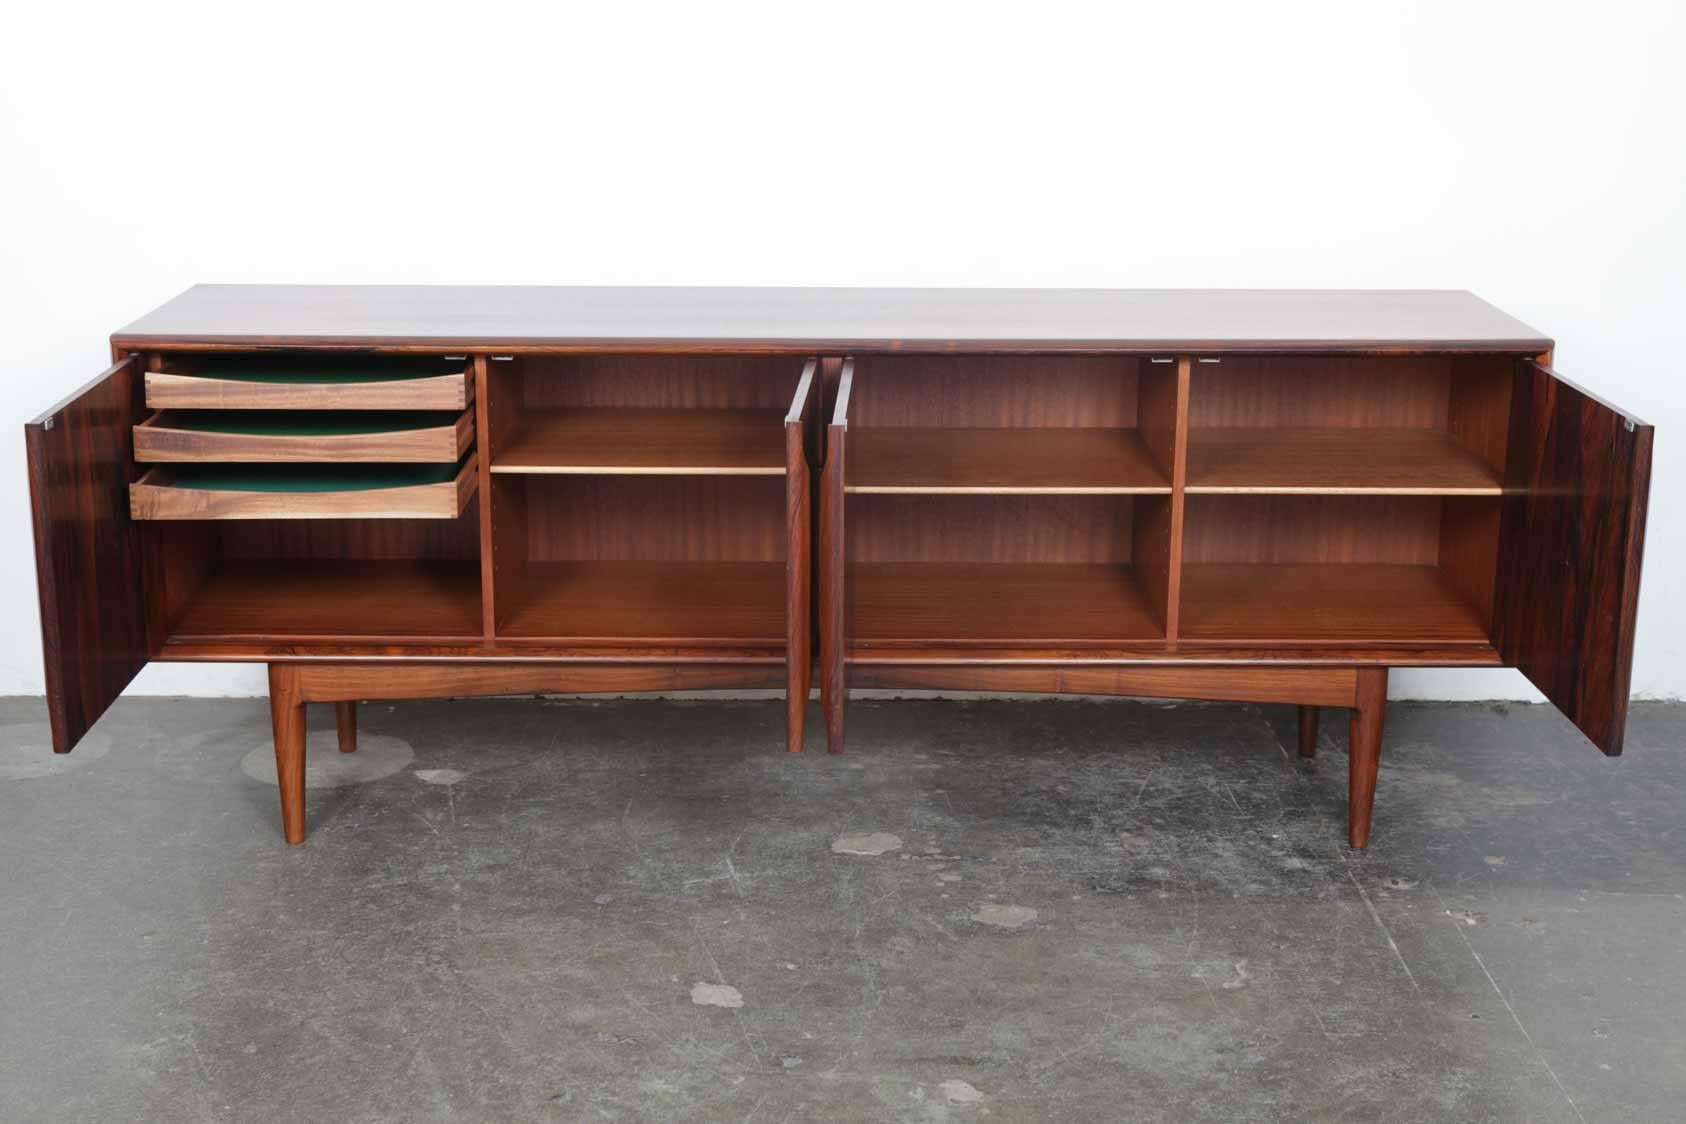 Danish 1960s low rosewood four-door sideboard with incredible grain throughout, newly refinished in a satin lacquer. Interior storage includes three single shelf compartments and one compartment with three internal drawers. Each door has an elegant